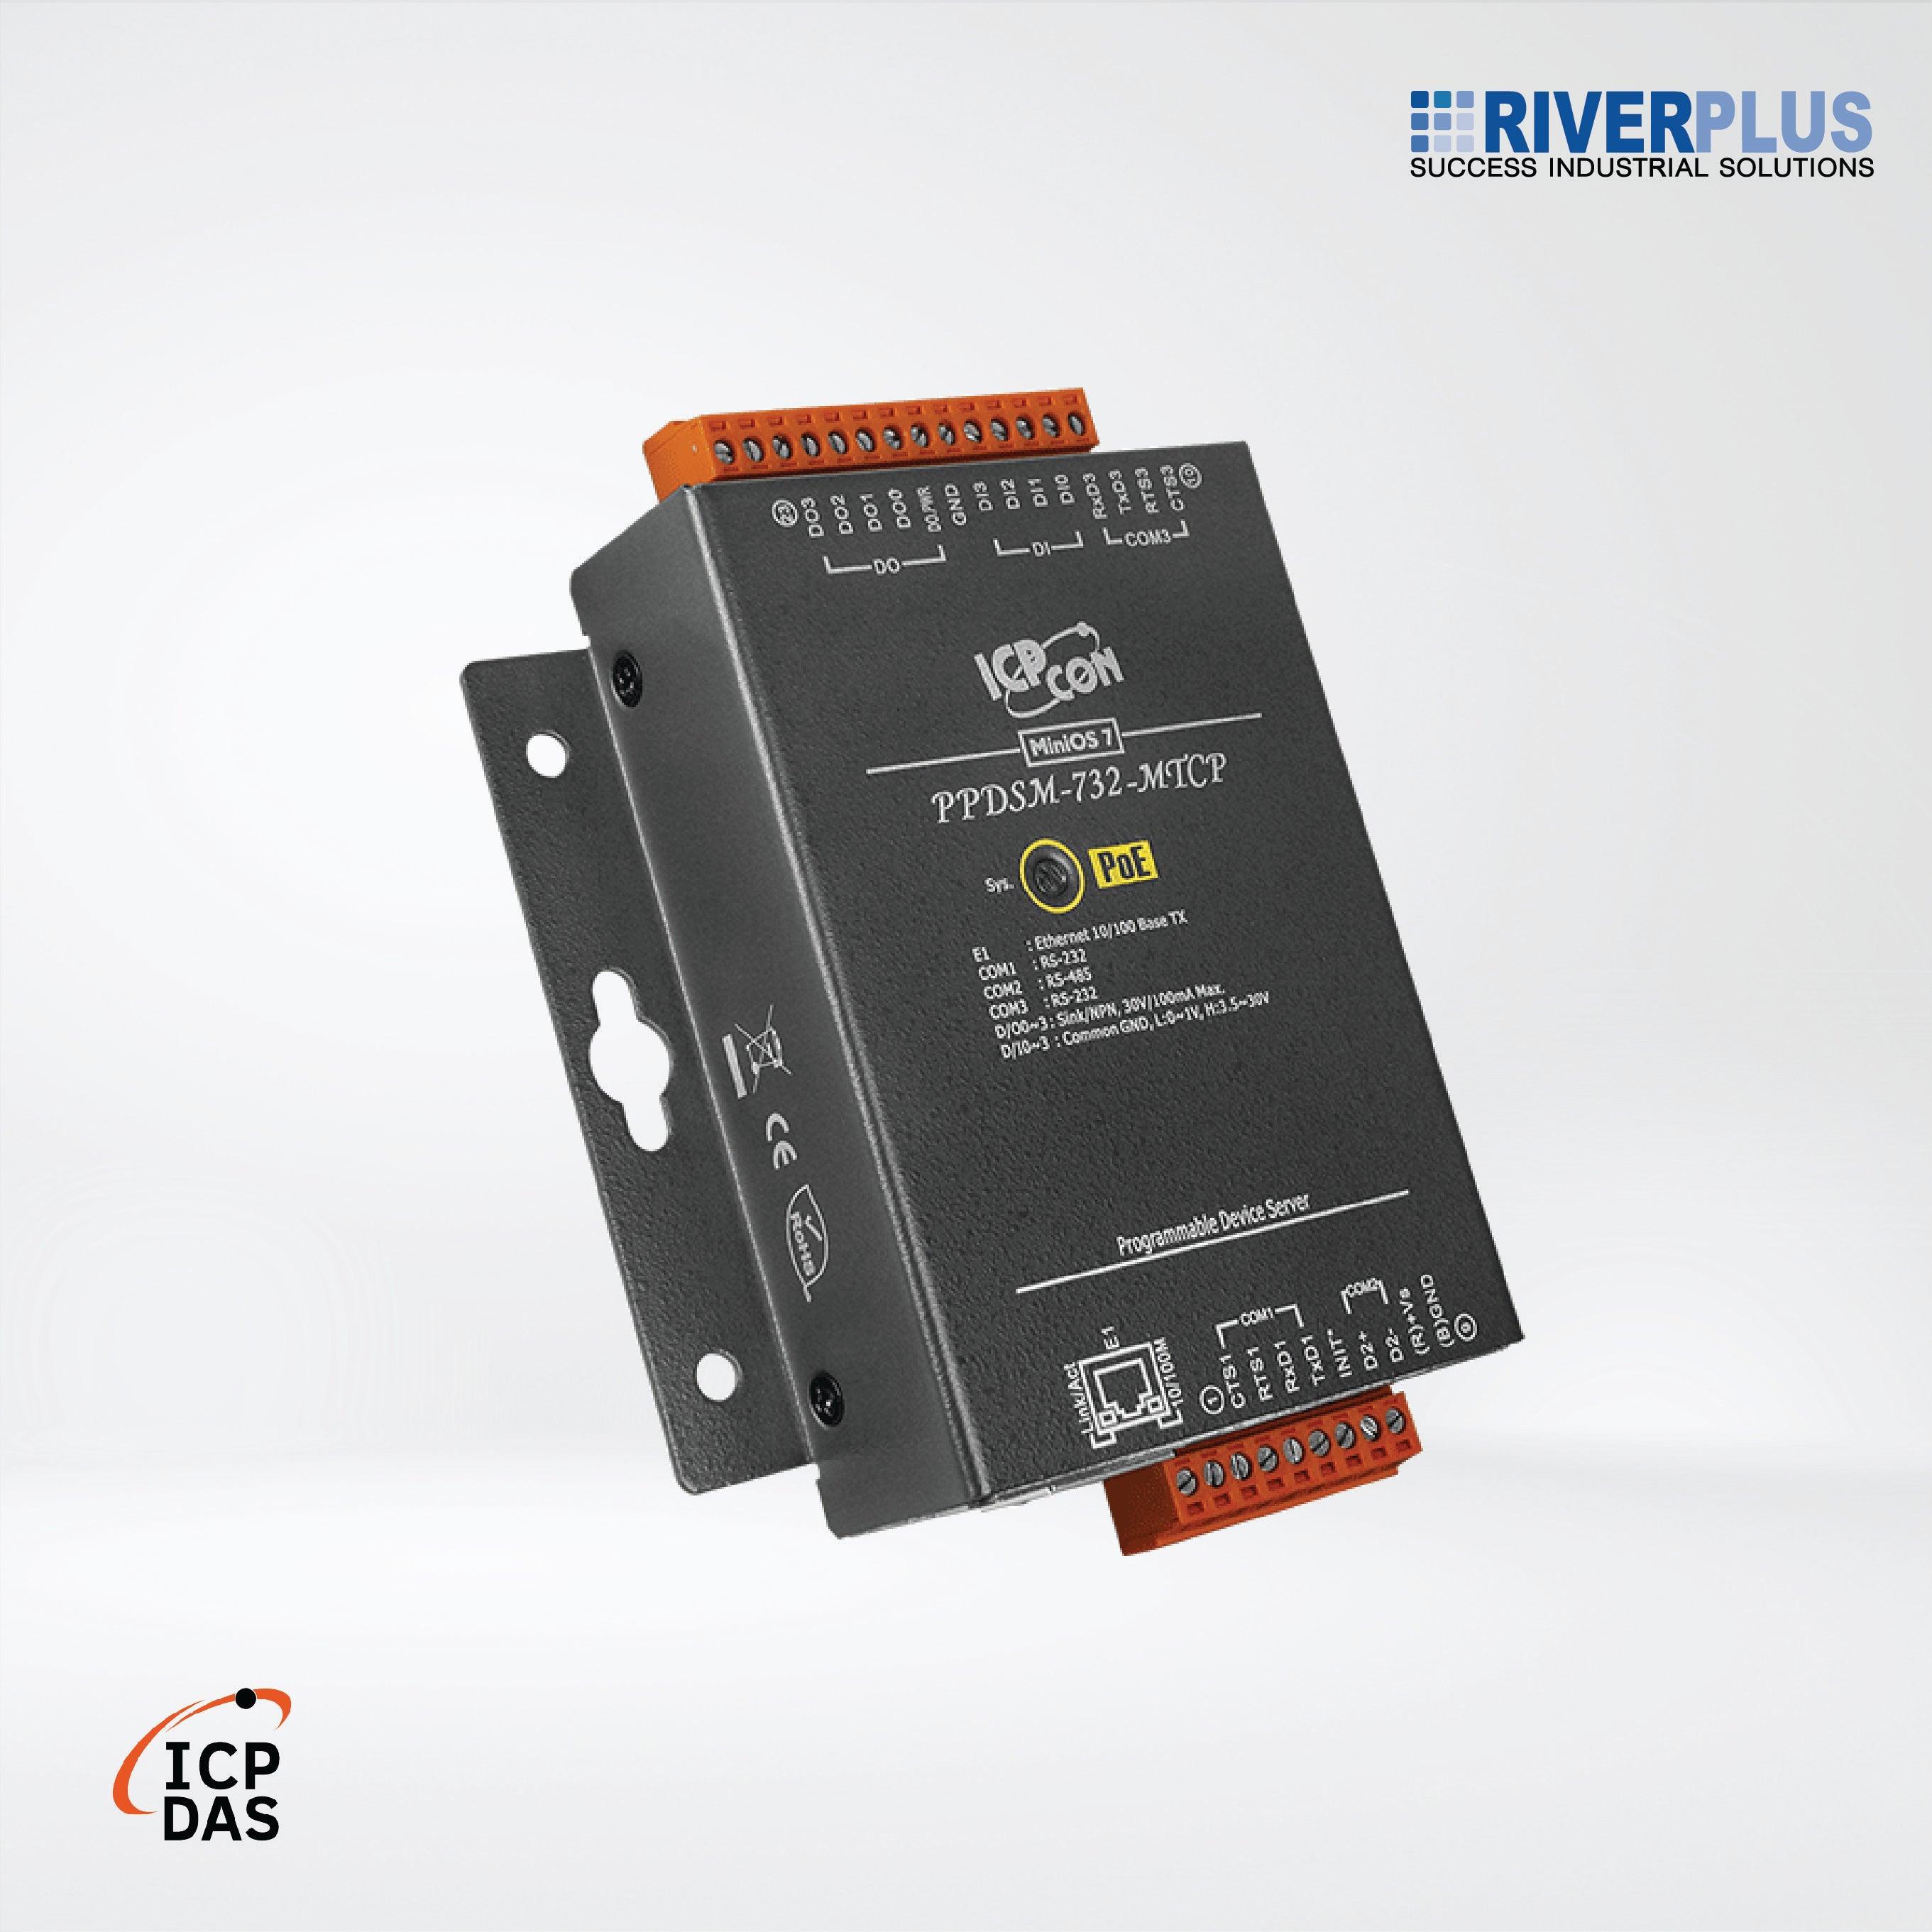 PPDSM-732-MTCP Programmable (2x RS-232 and 1x RS-485) Serial-to-Ethernet Device Server - Riverplus